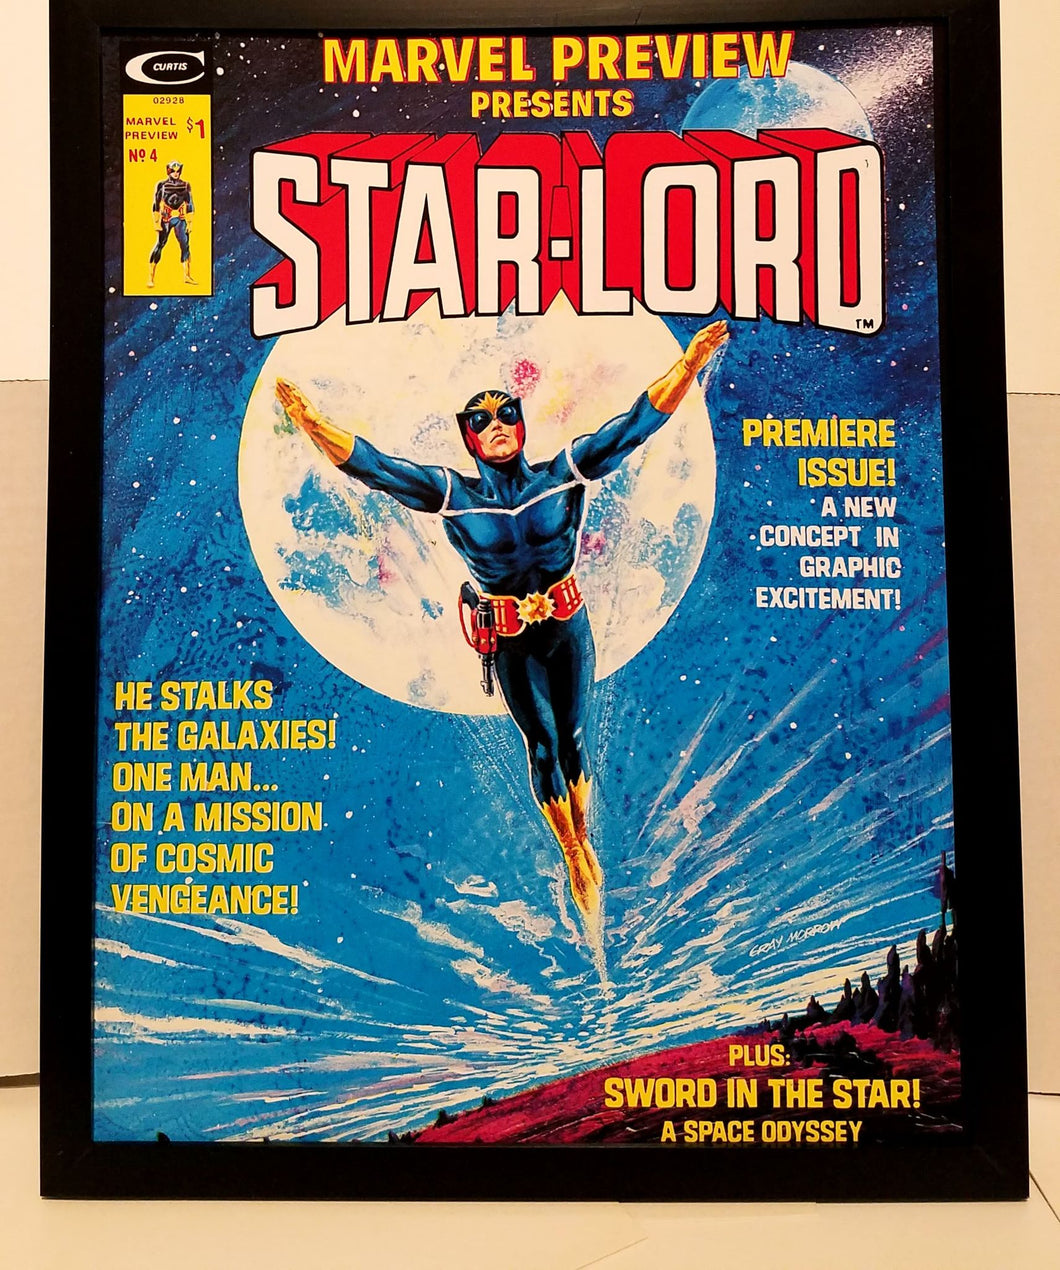 Marvel Preview #4 Starlord by Gray Morrow 11x14 FRAMED Marvel Comics Art Print Poster